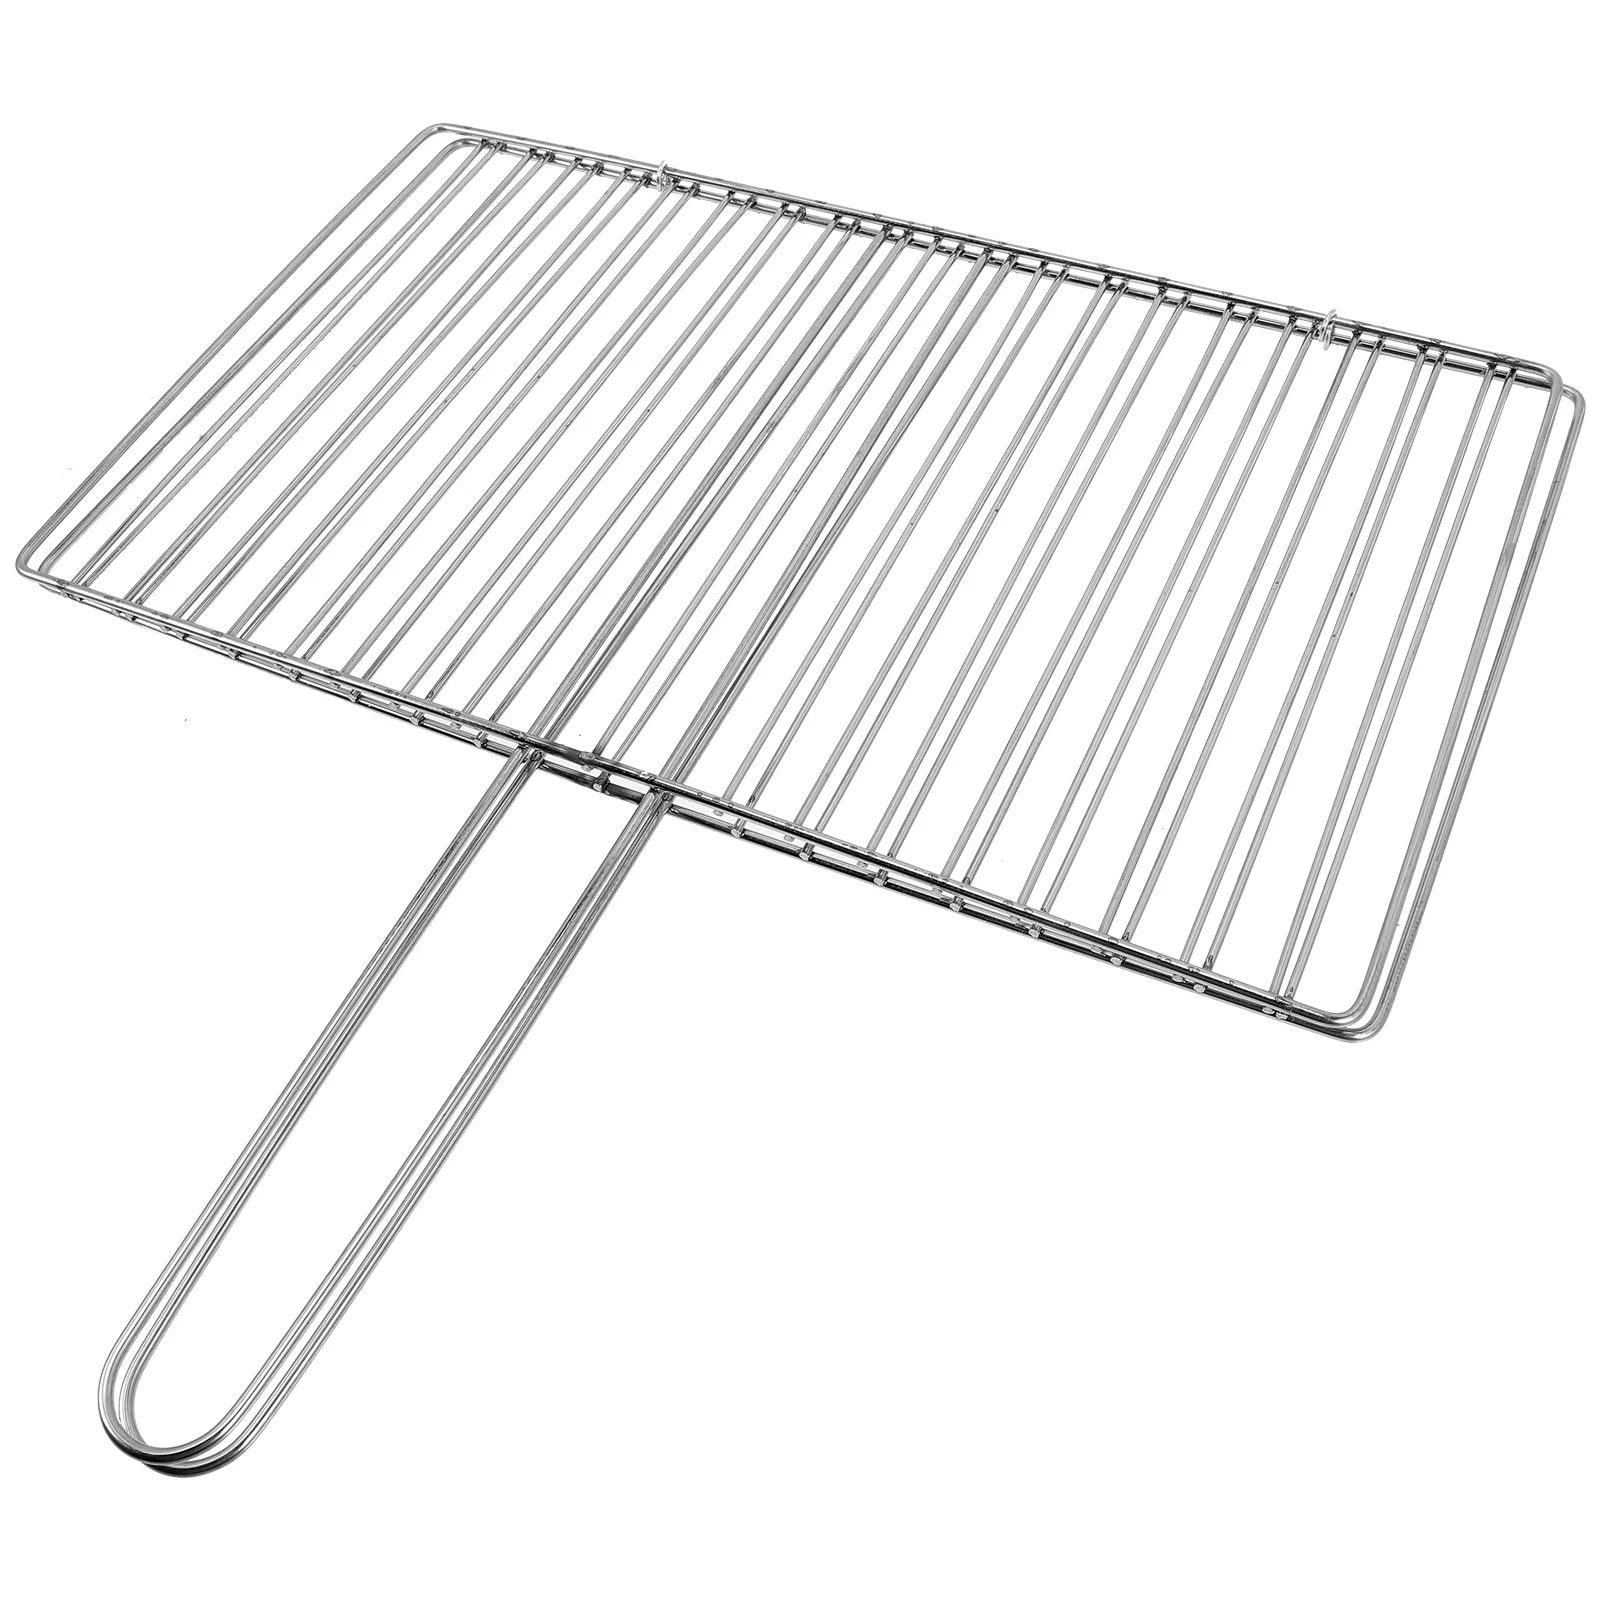 

Barbecue Net Picnic Grill Equipment Stainless Steel Grilling Baskets Vegetable Mesh Fish Outdoor Bbq Beef Tool Racks Metal Clip